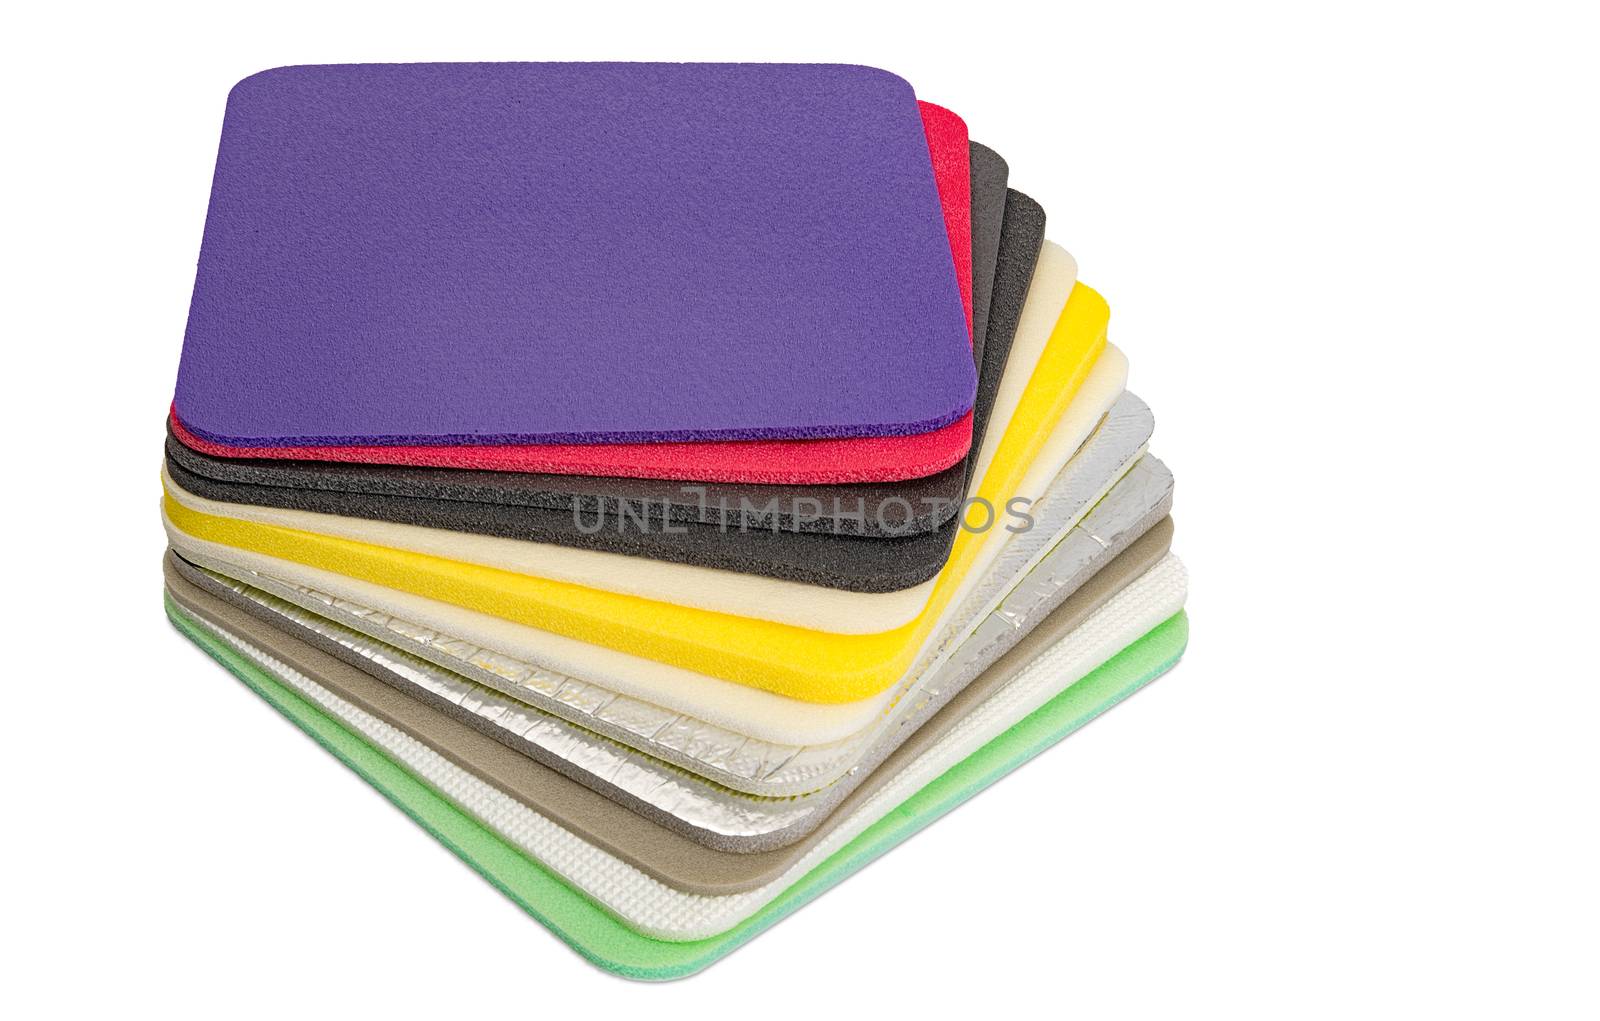 Polyethylene Foam Multi Colour and type Material Closed Up